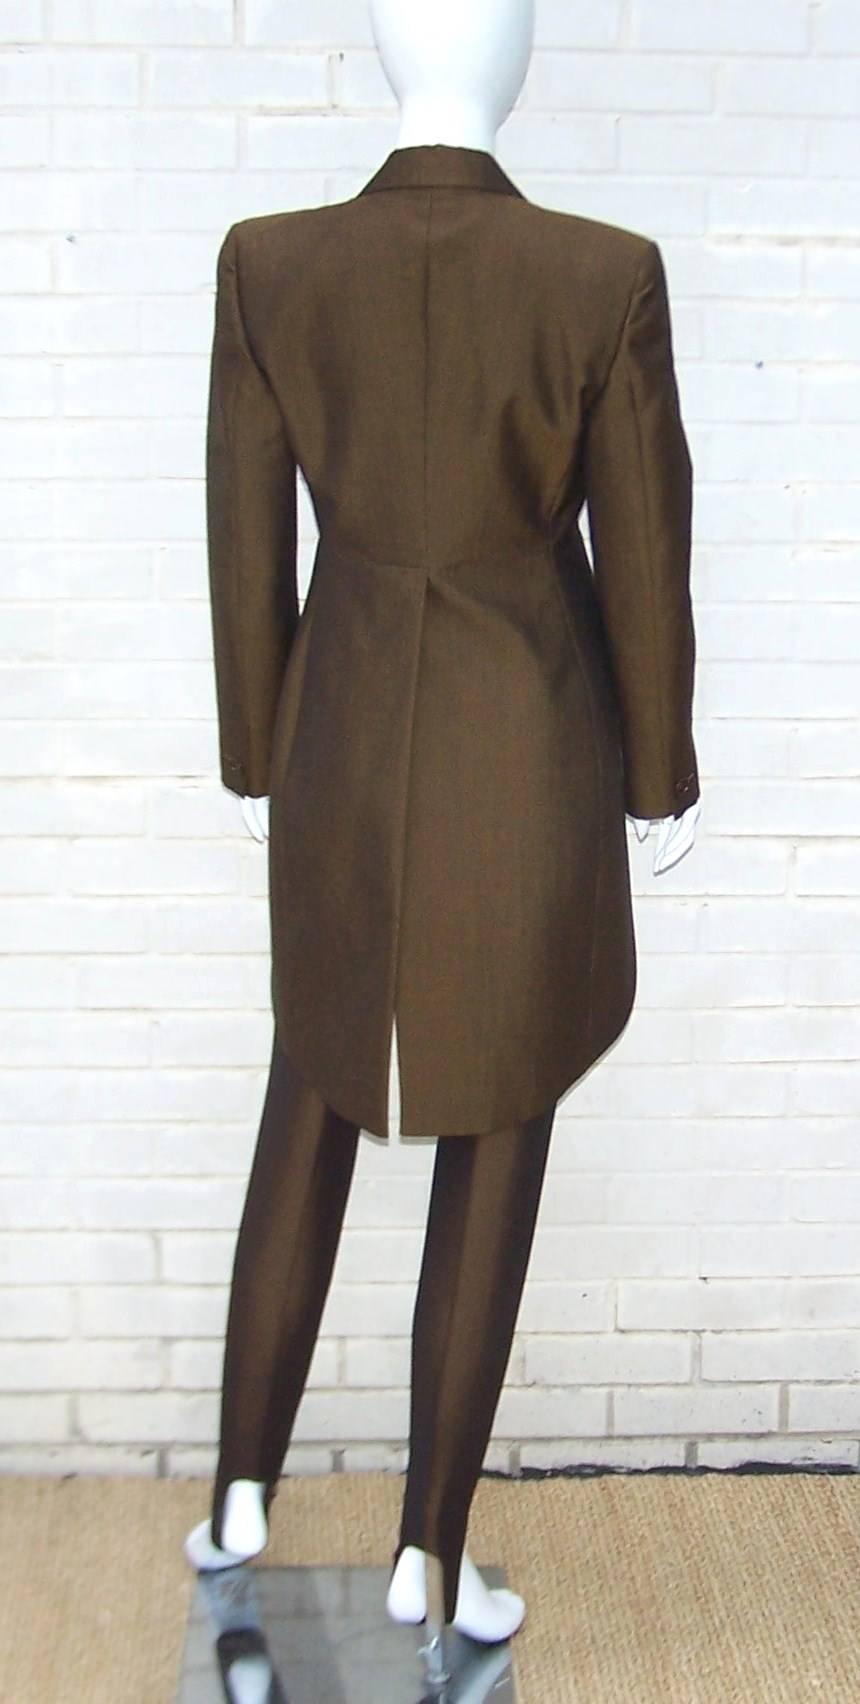 androgynous pant suits